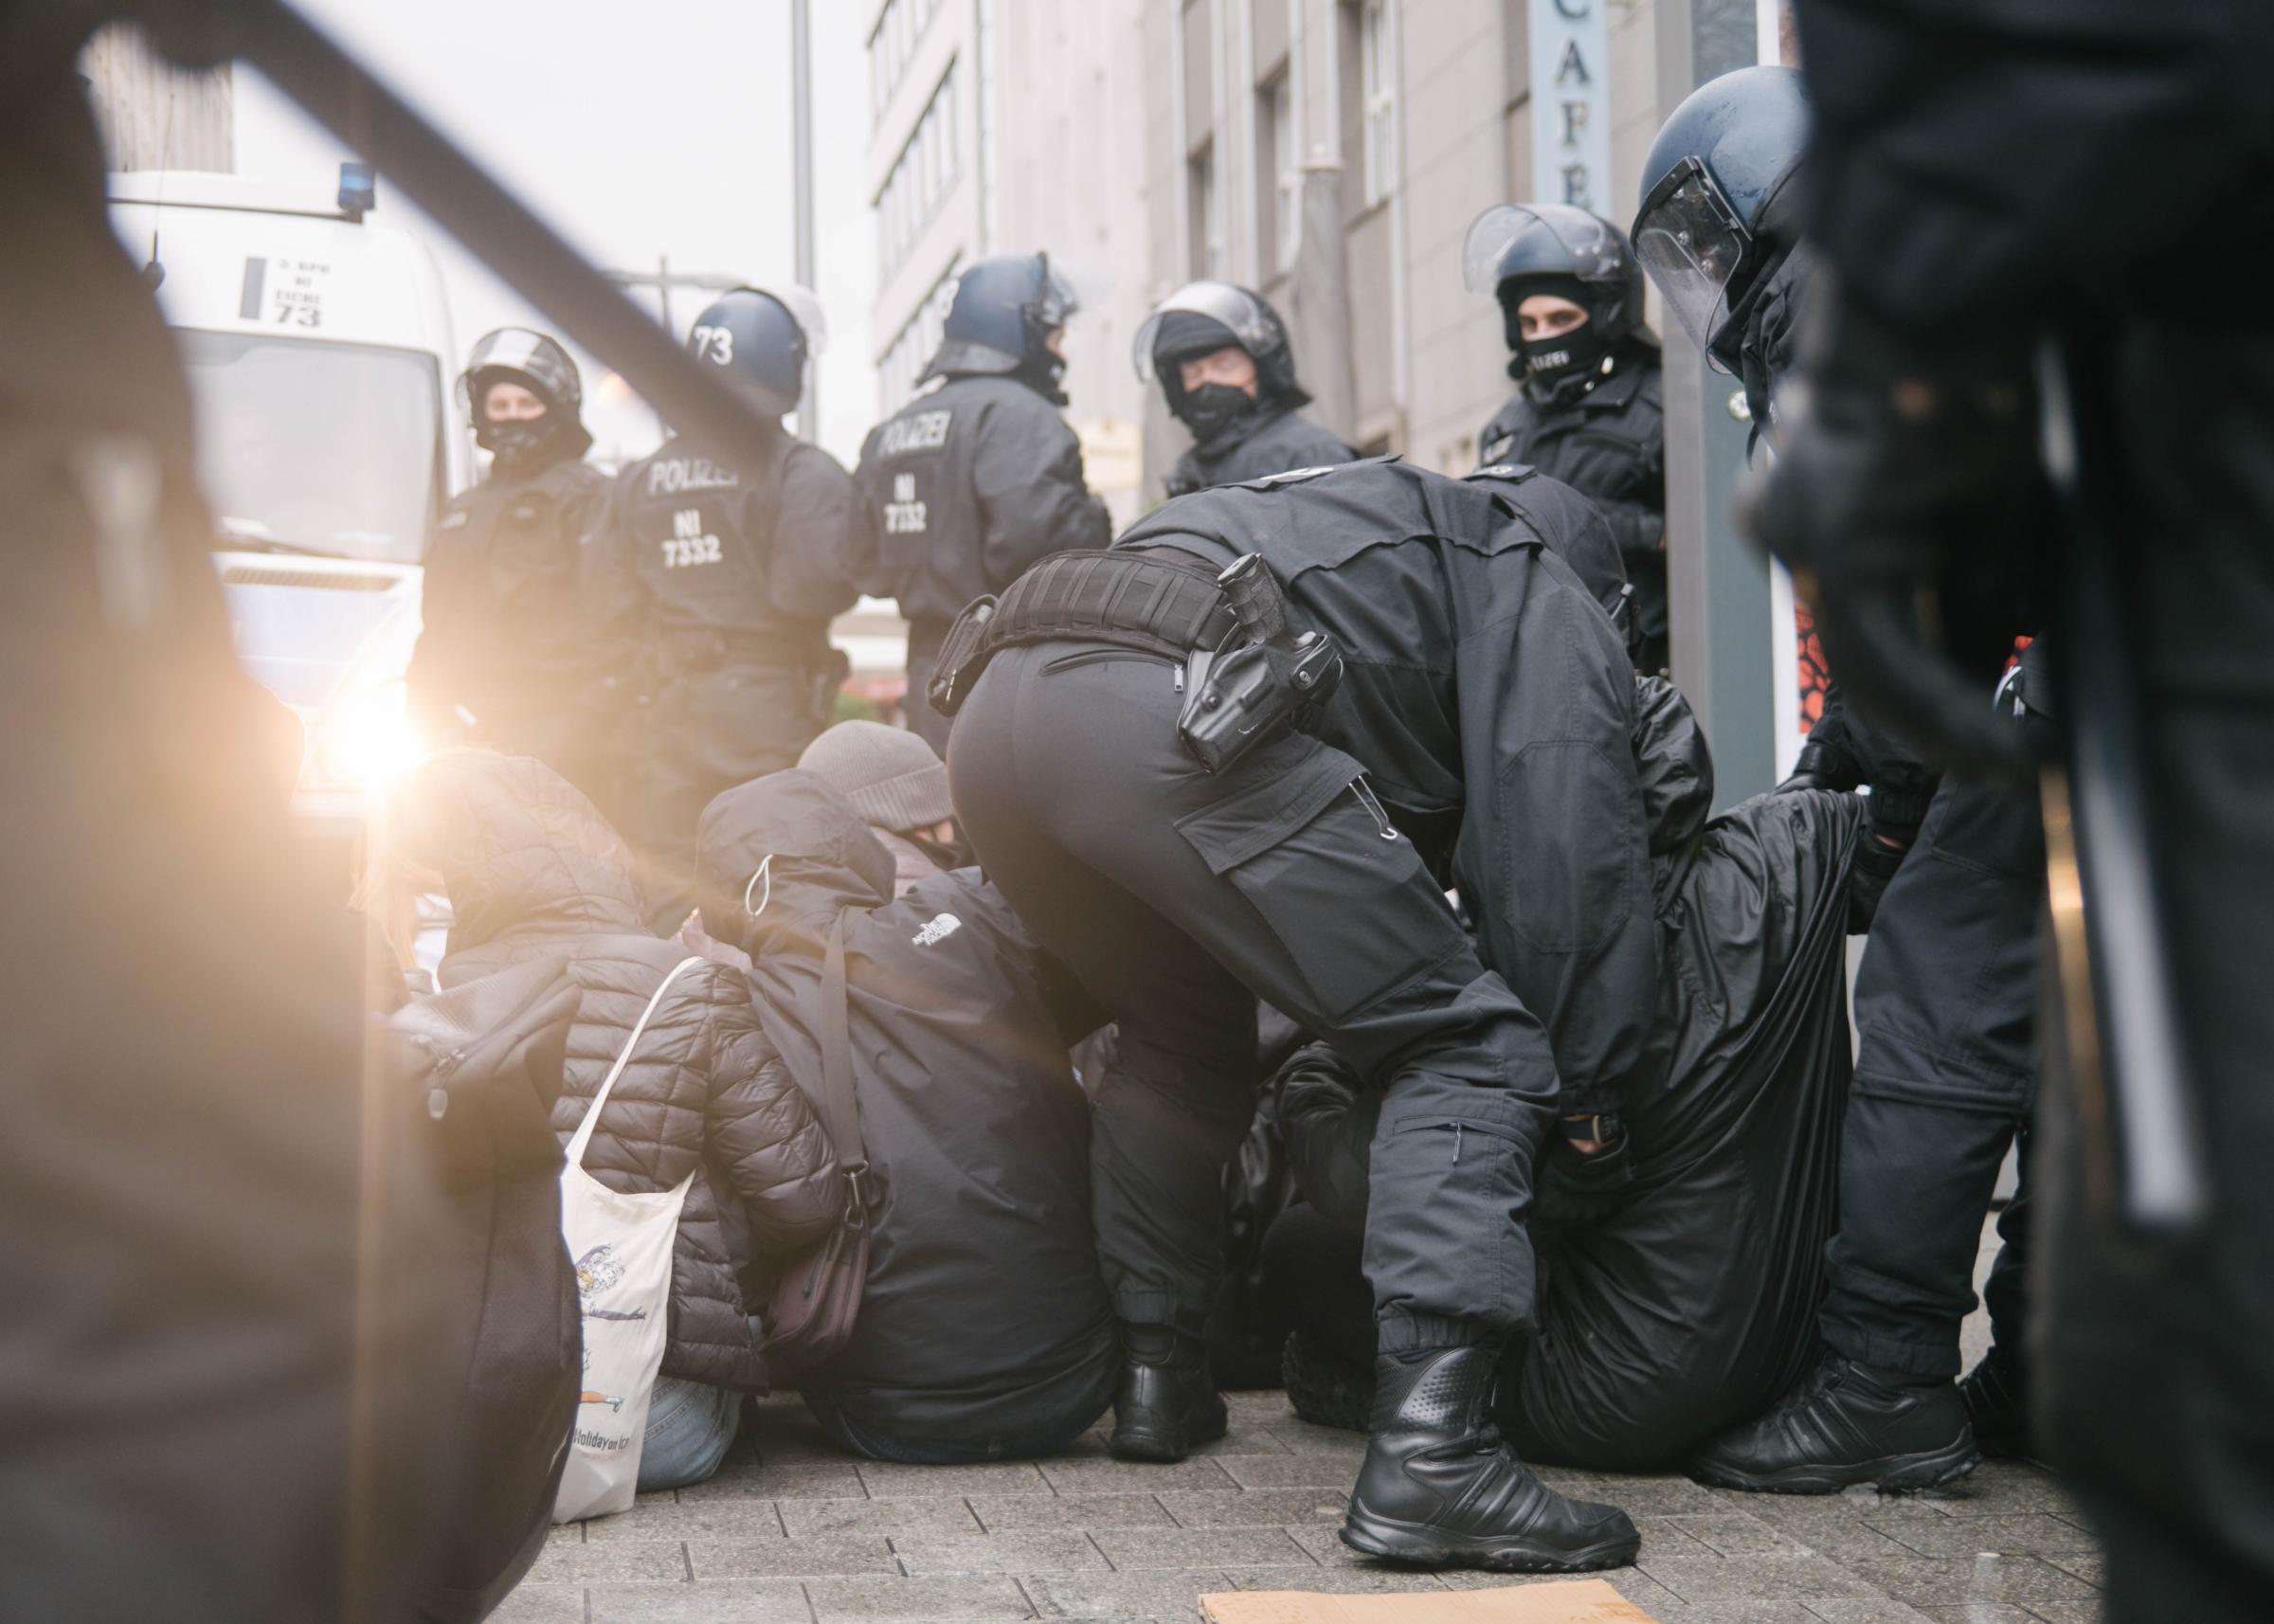 Antifascists block AfD march in Hannover - 